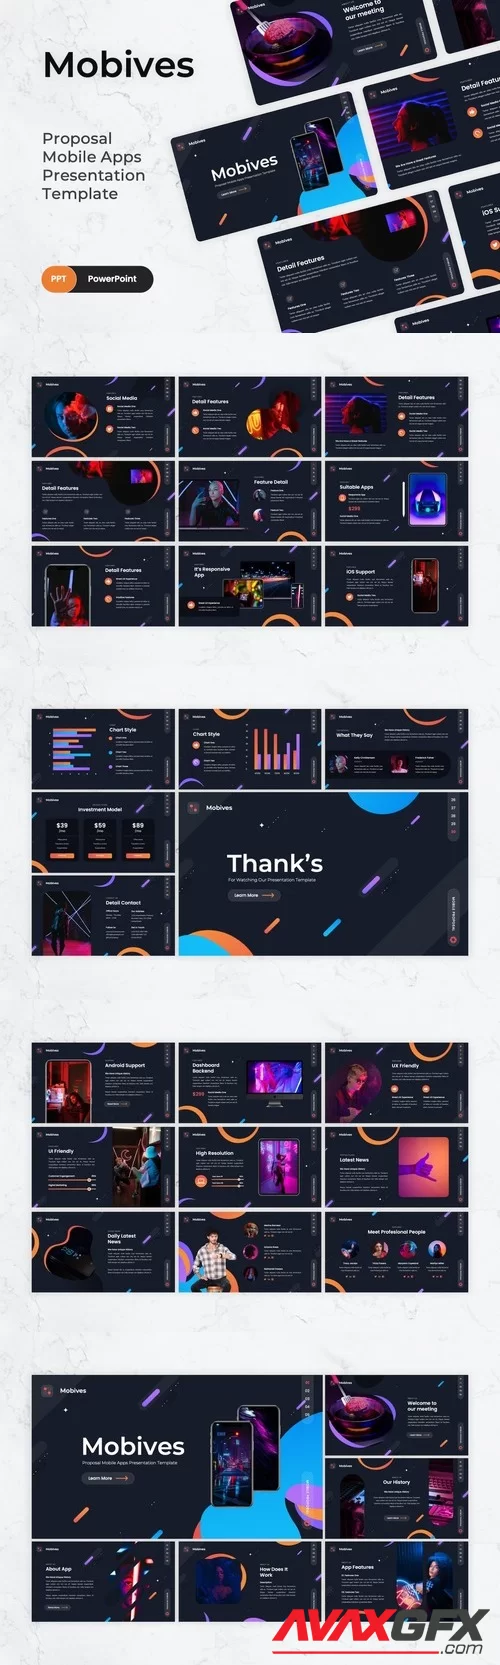 Mobives - Mobile Proposal PowerPoint Template PPTX